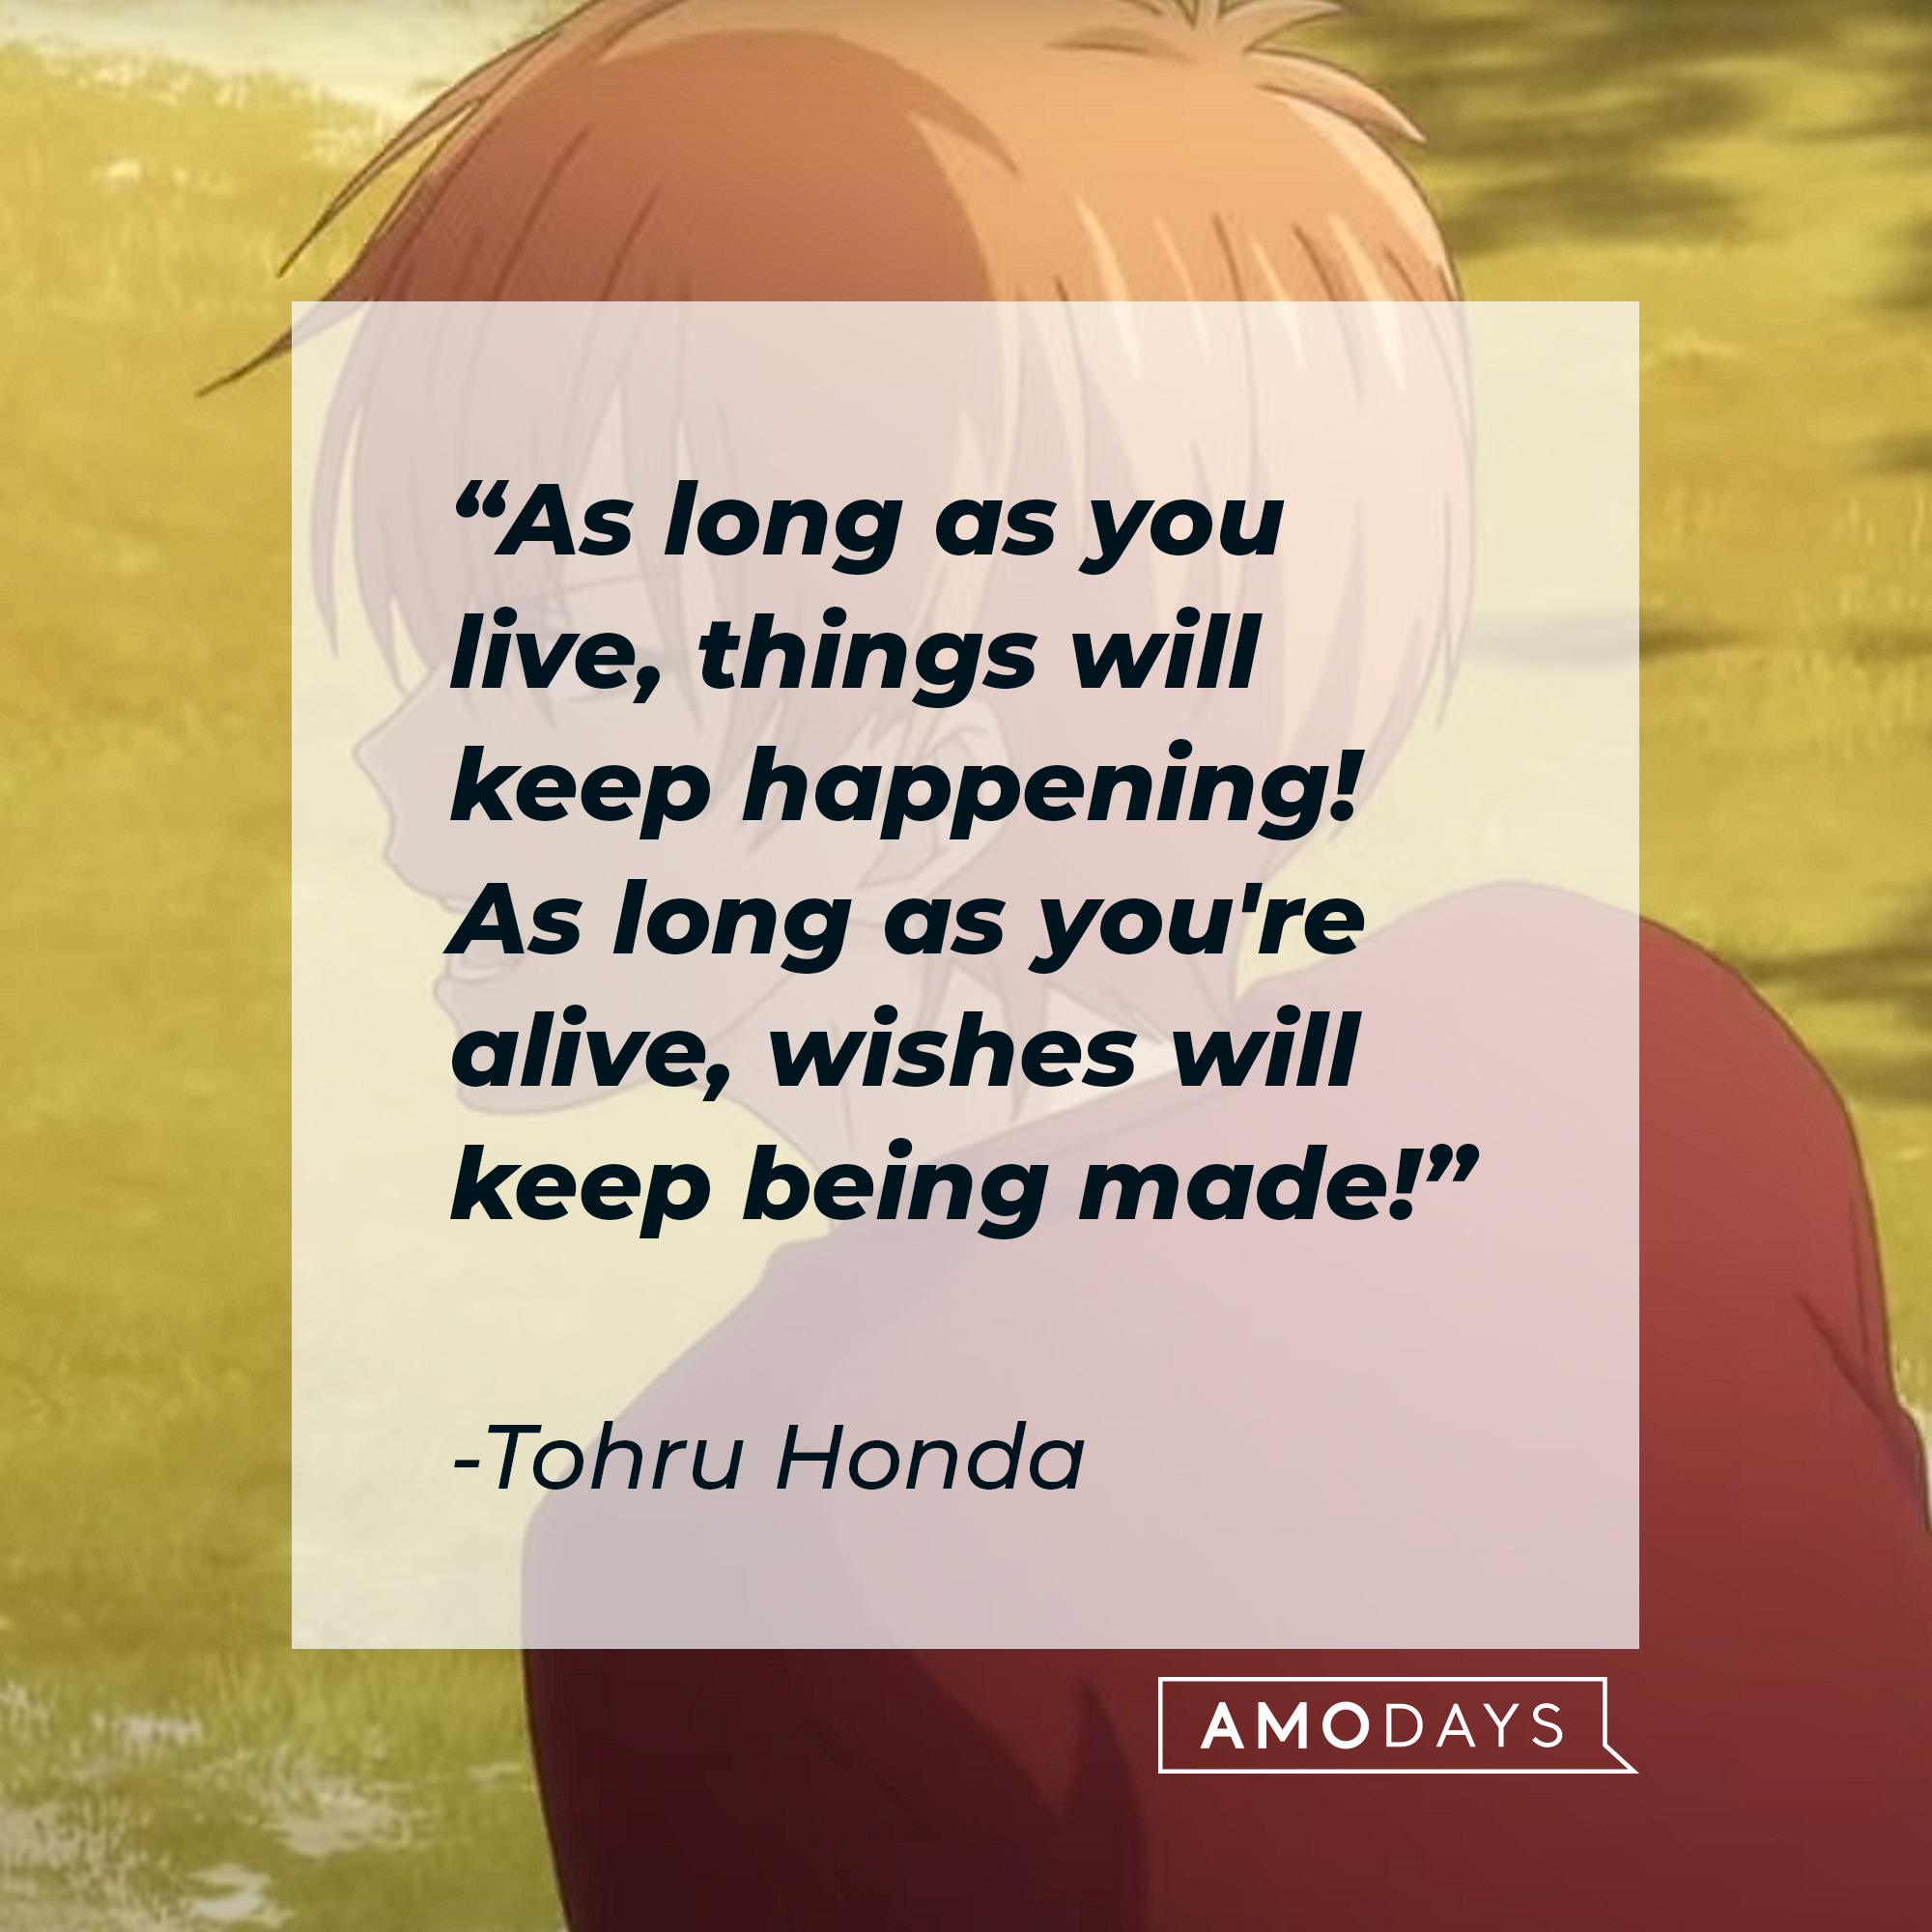 Tohru Honda's quote: "As long as you live, things will keep happening! As long as you're alive, wishes will keep being made!" | Image: youtube.com/Crunchyroll Collection